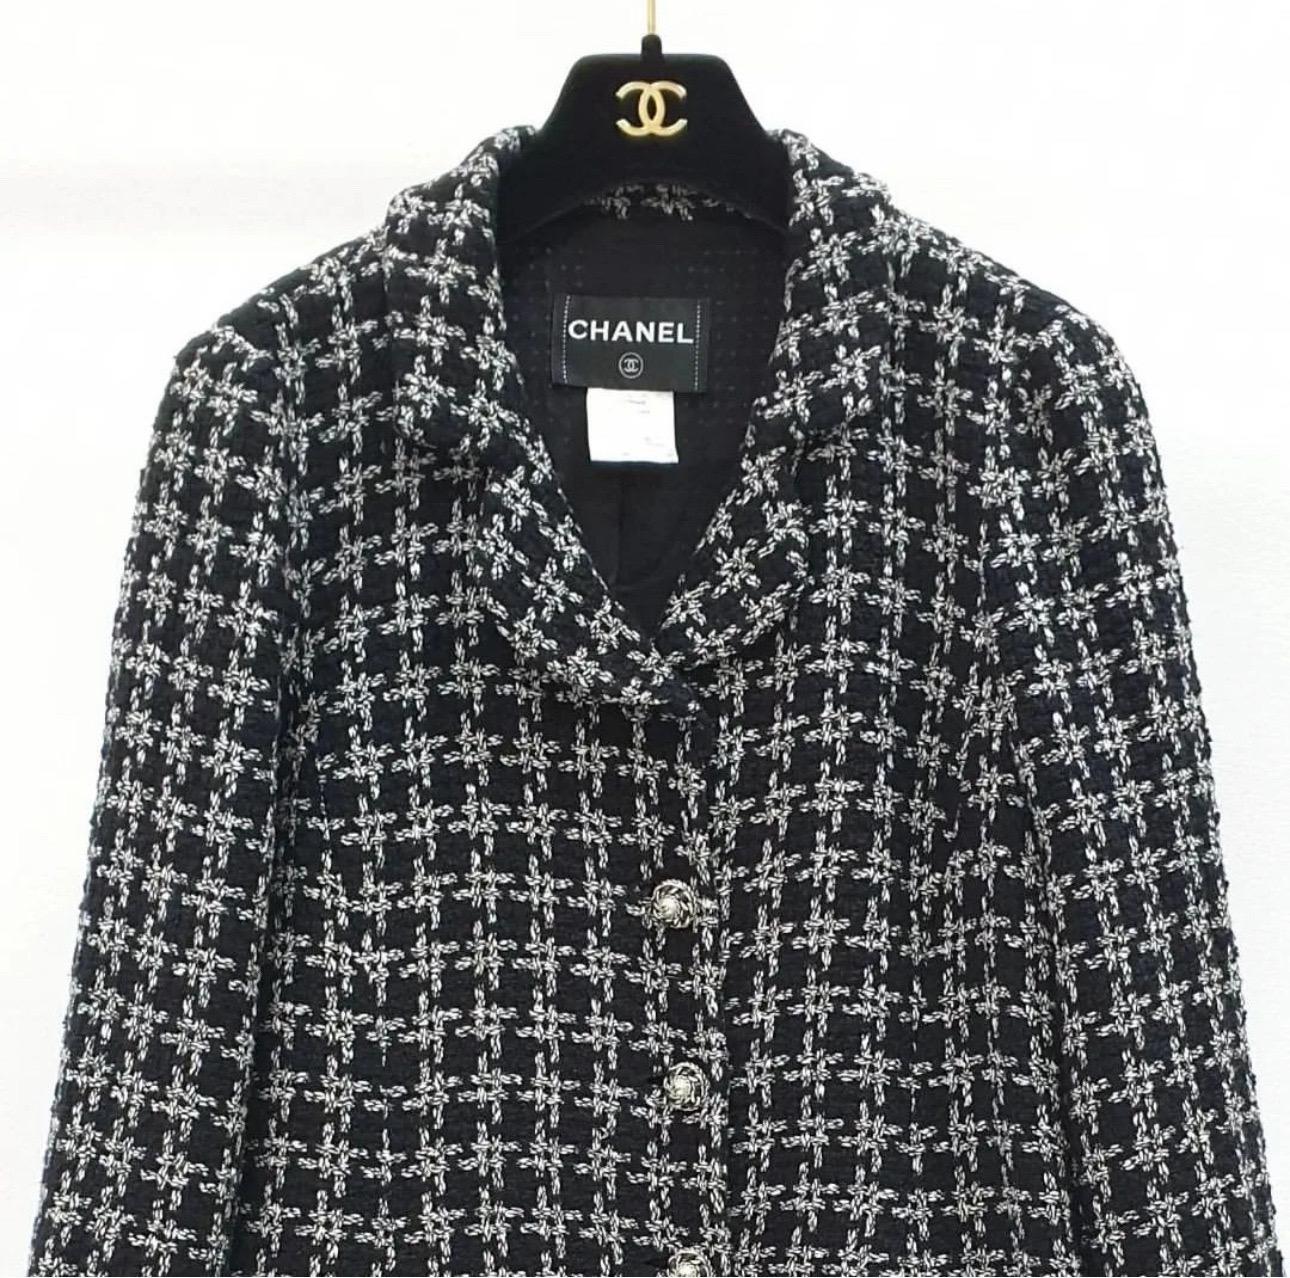 This stunning jacket from Chanel will become a staple in your wardrobe. 

This jacket features a classic blazer silhouette made from gorgeous cotton and silk blend in a chic black with white large check pattern. Ornamental faux pearl and leather